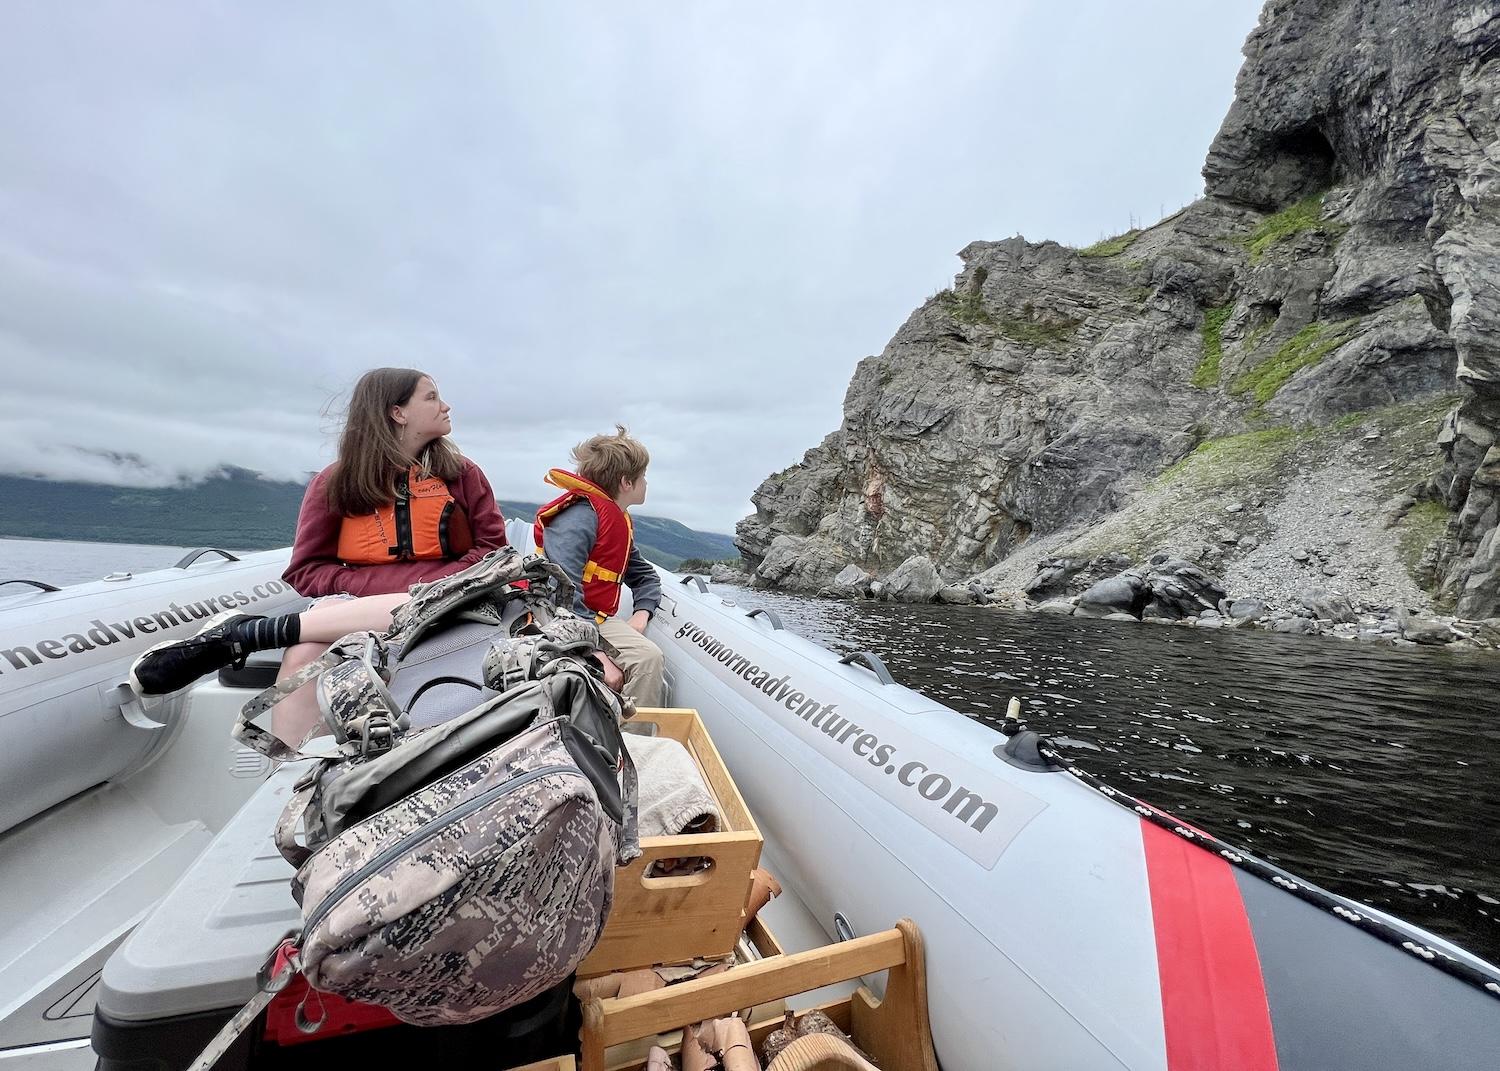 Gros Morne Adventures takes guests by boat to an isolated cove for an Indigenous experience called Discover Mekapisk.